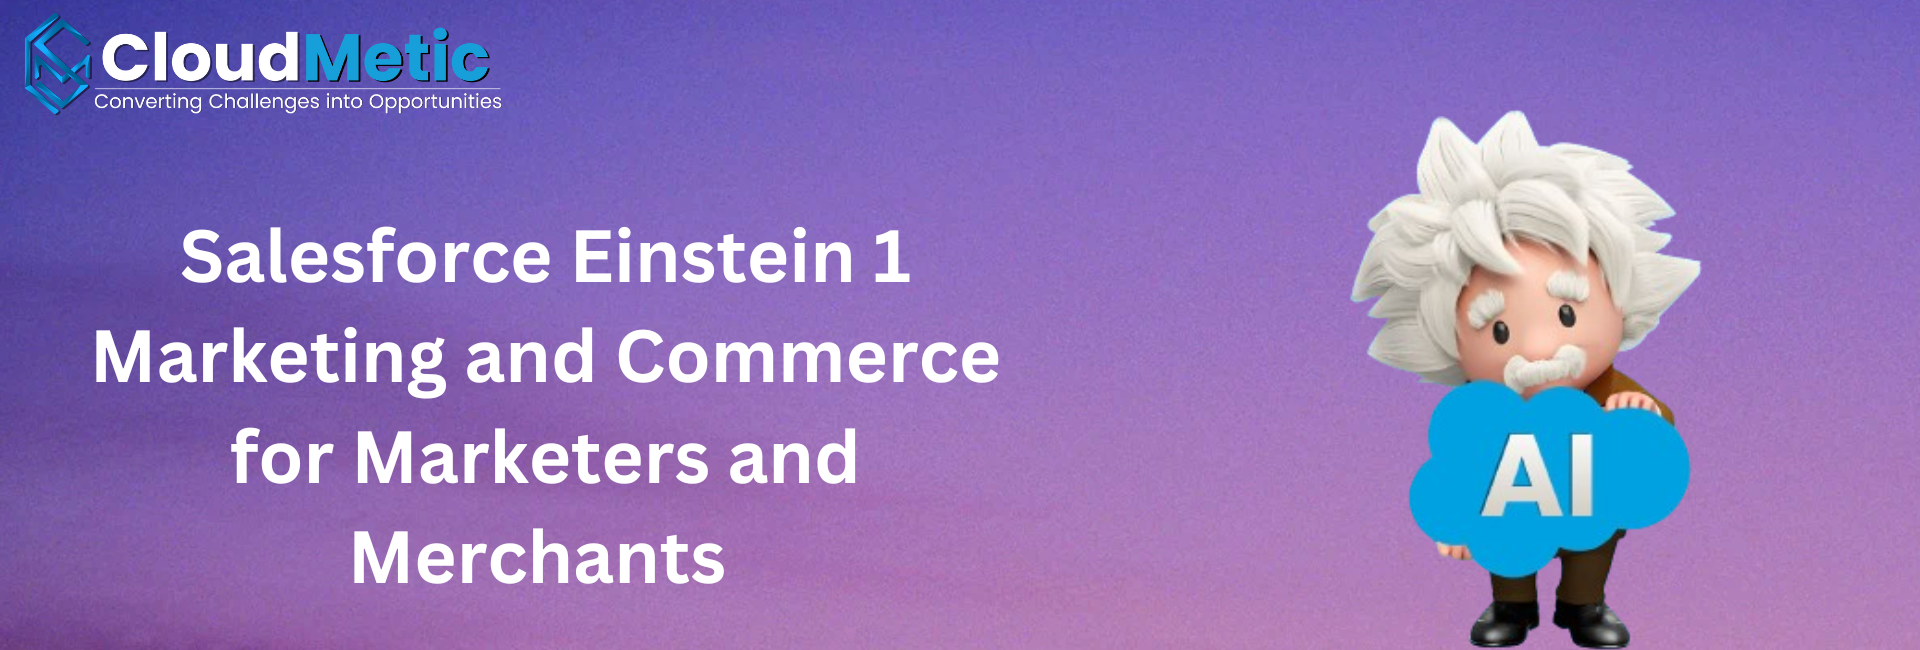 Salesforce Einstein 1 Marketing and Commerce for Marketers and Merchants